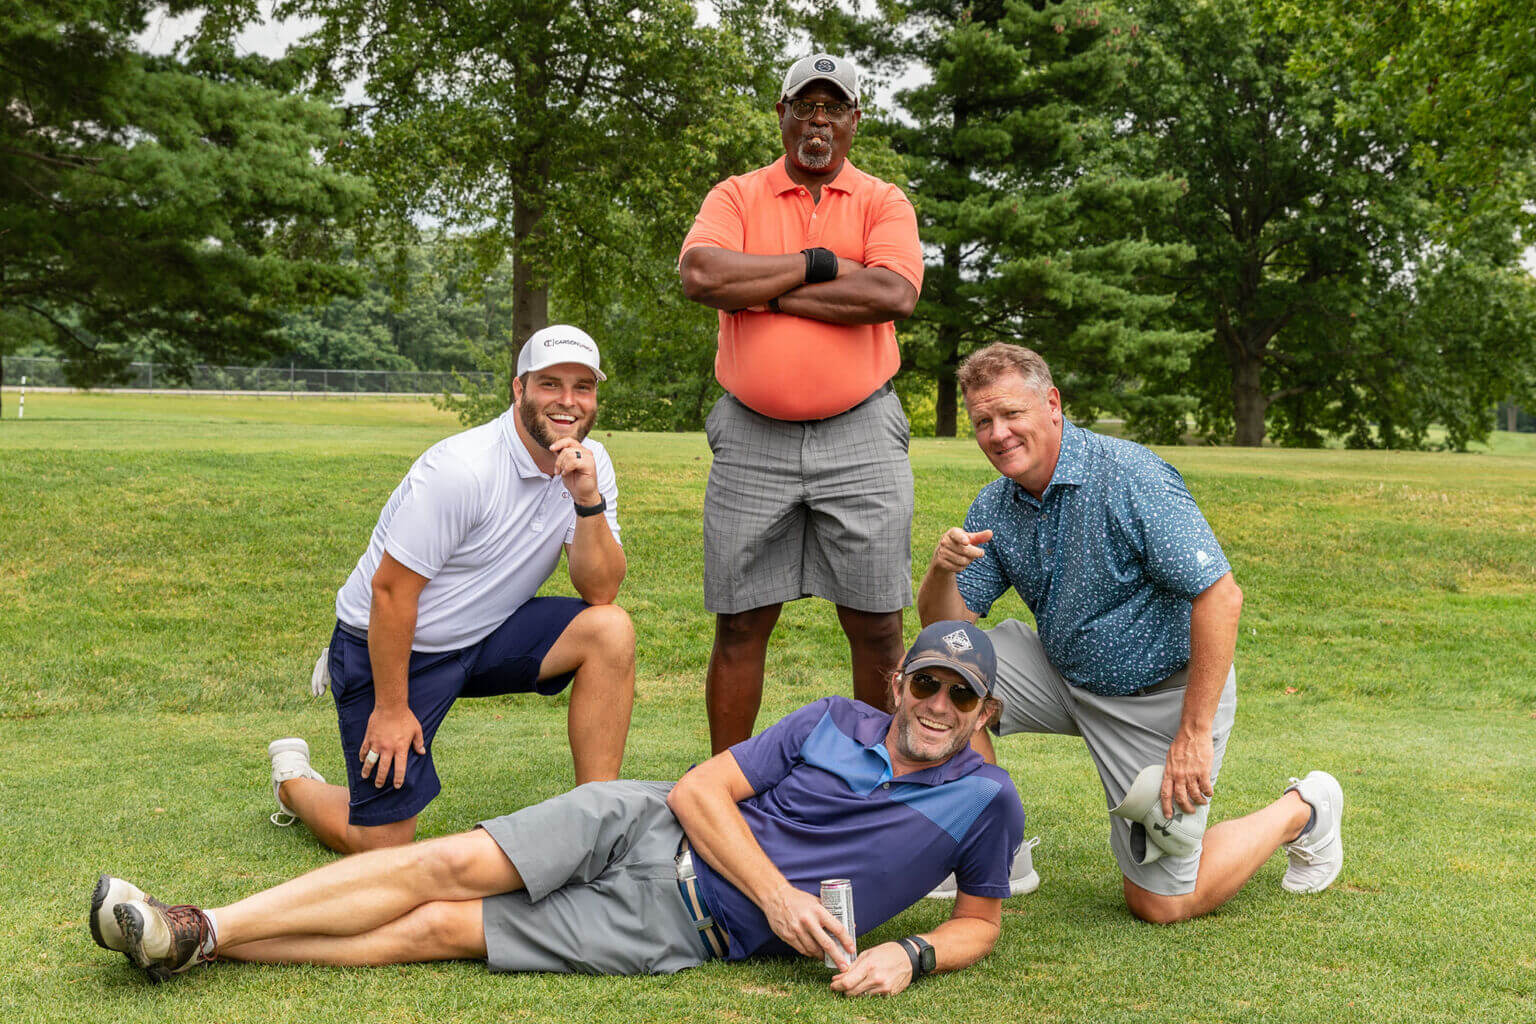 Golf Outing - Jerry's team